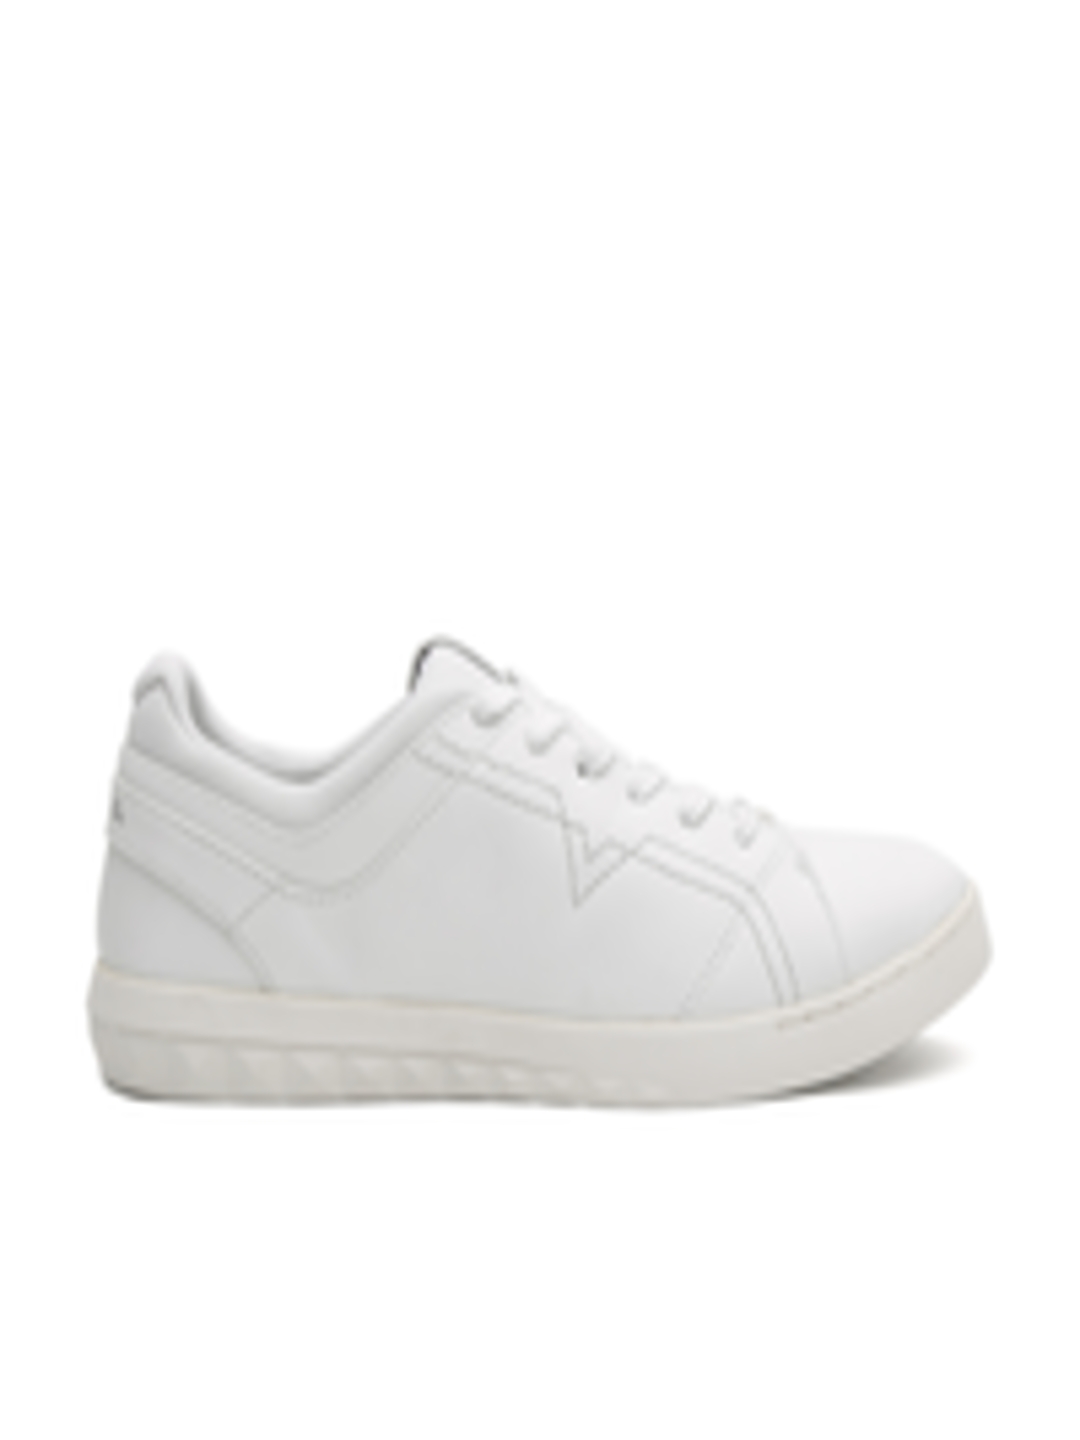 Buy DIESEL Men Off White Leather Sneakers - Casual Shoes for Men 2011316 | Myntra1080 x 1440